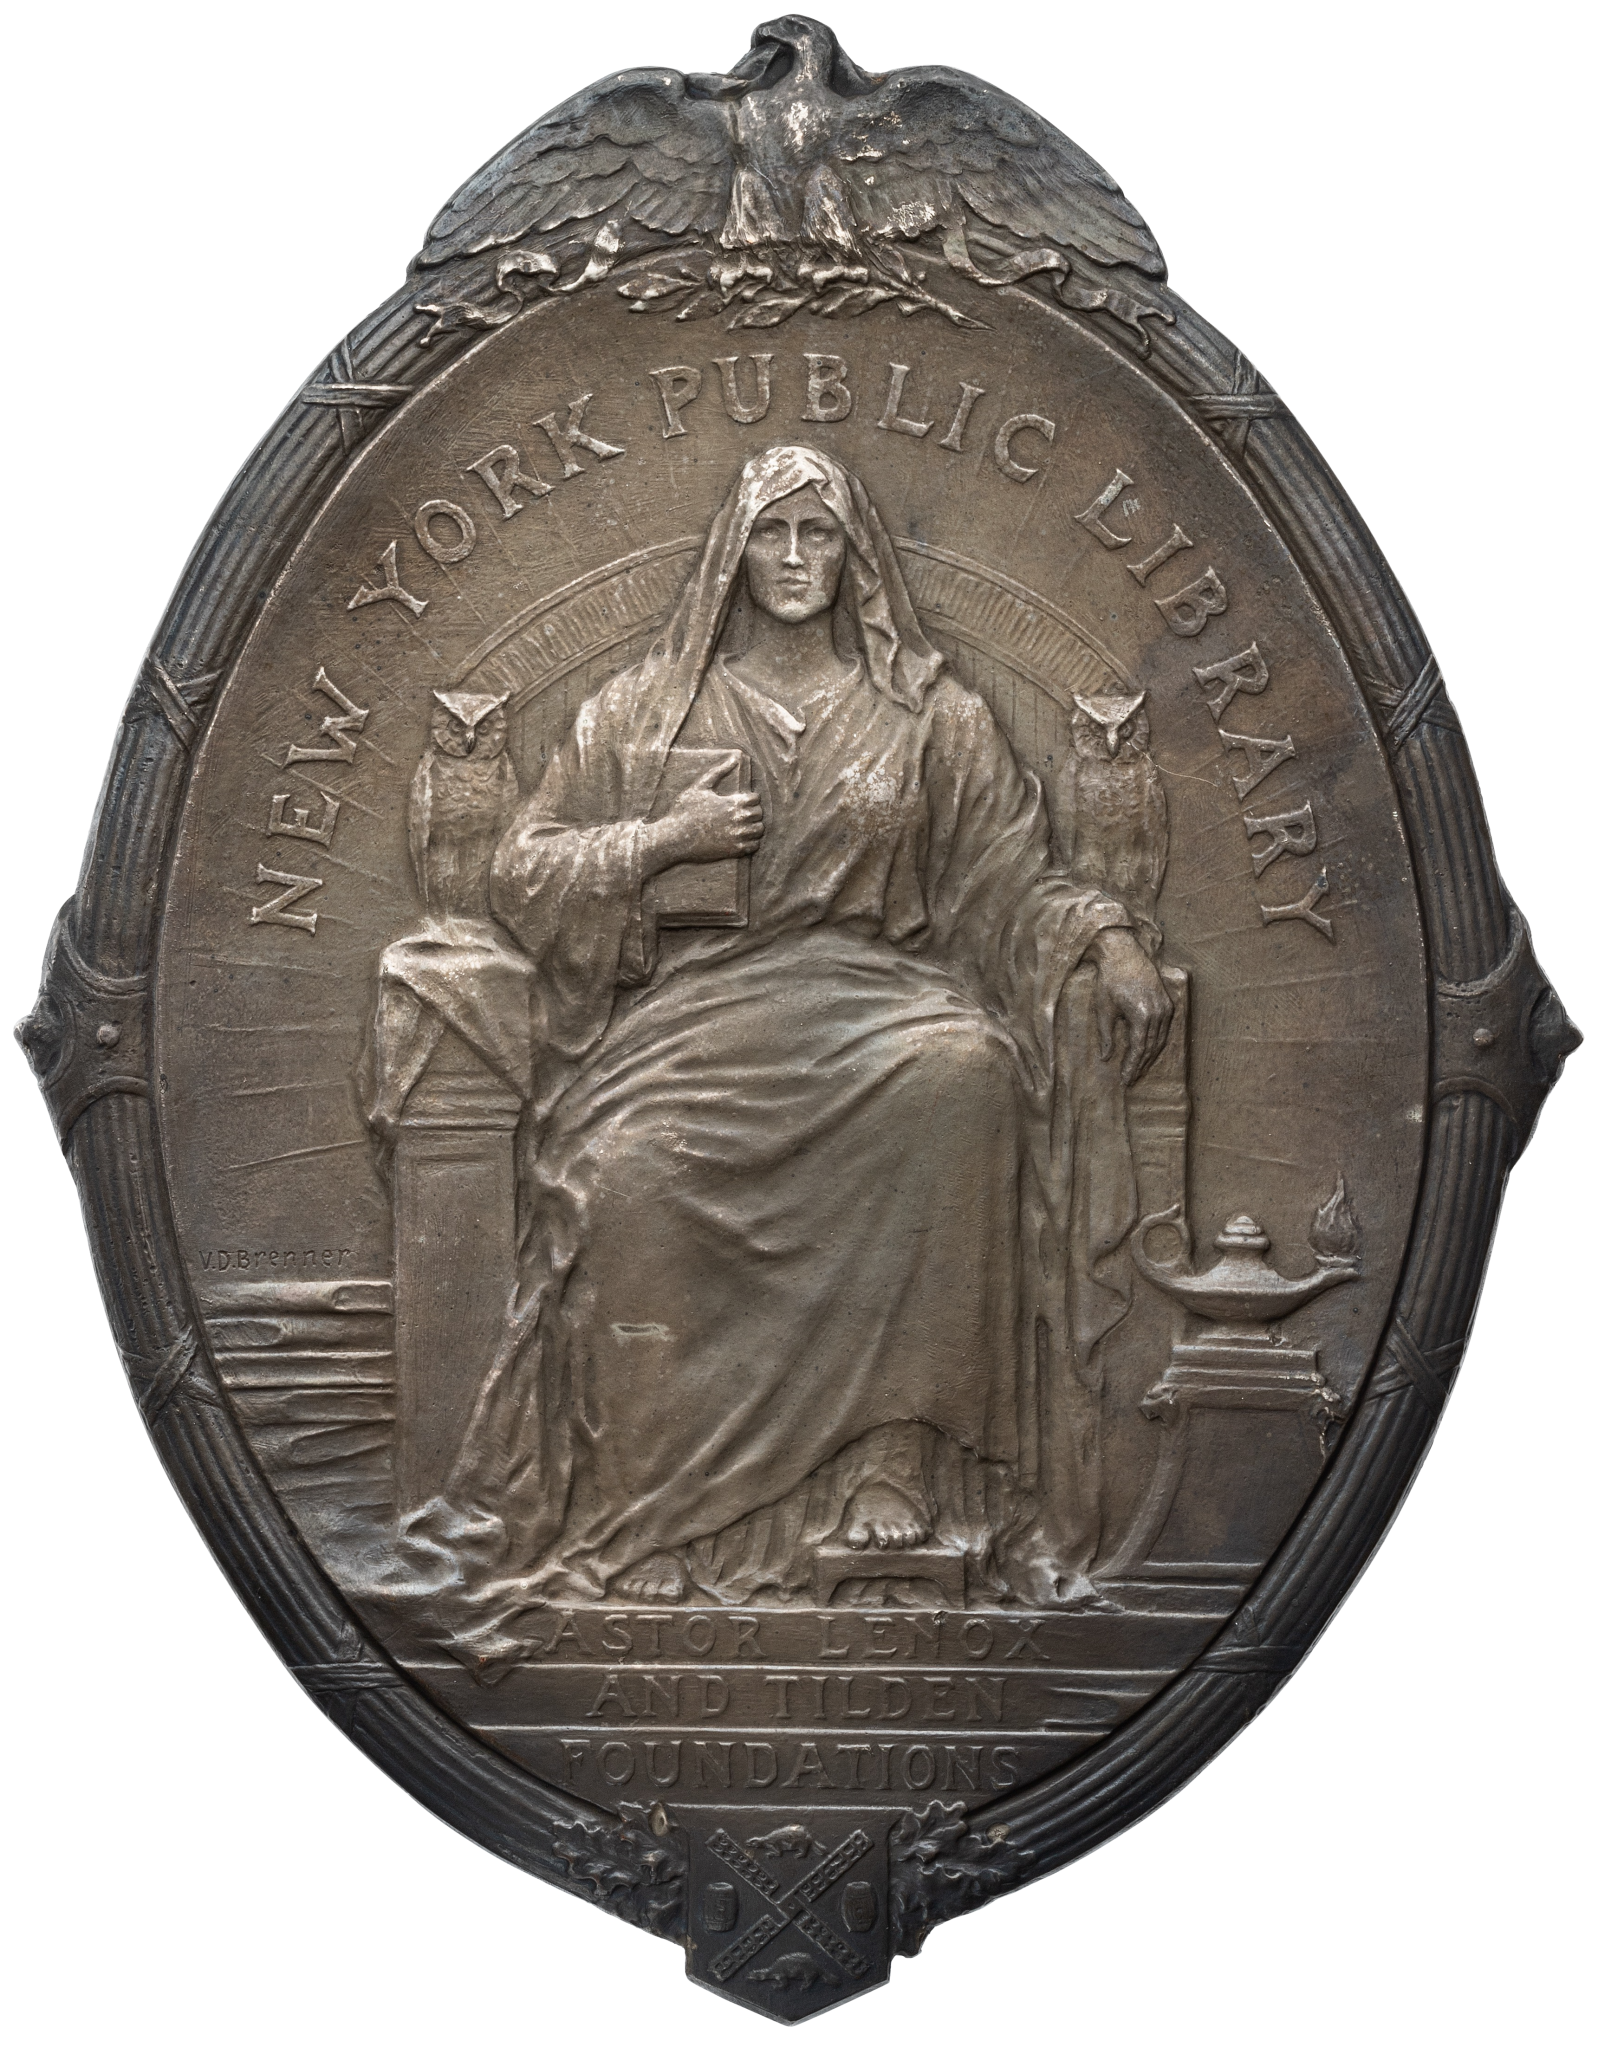 Hahlo-2, The New York Public Library Seal